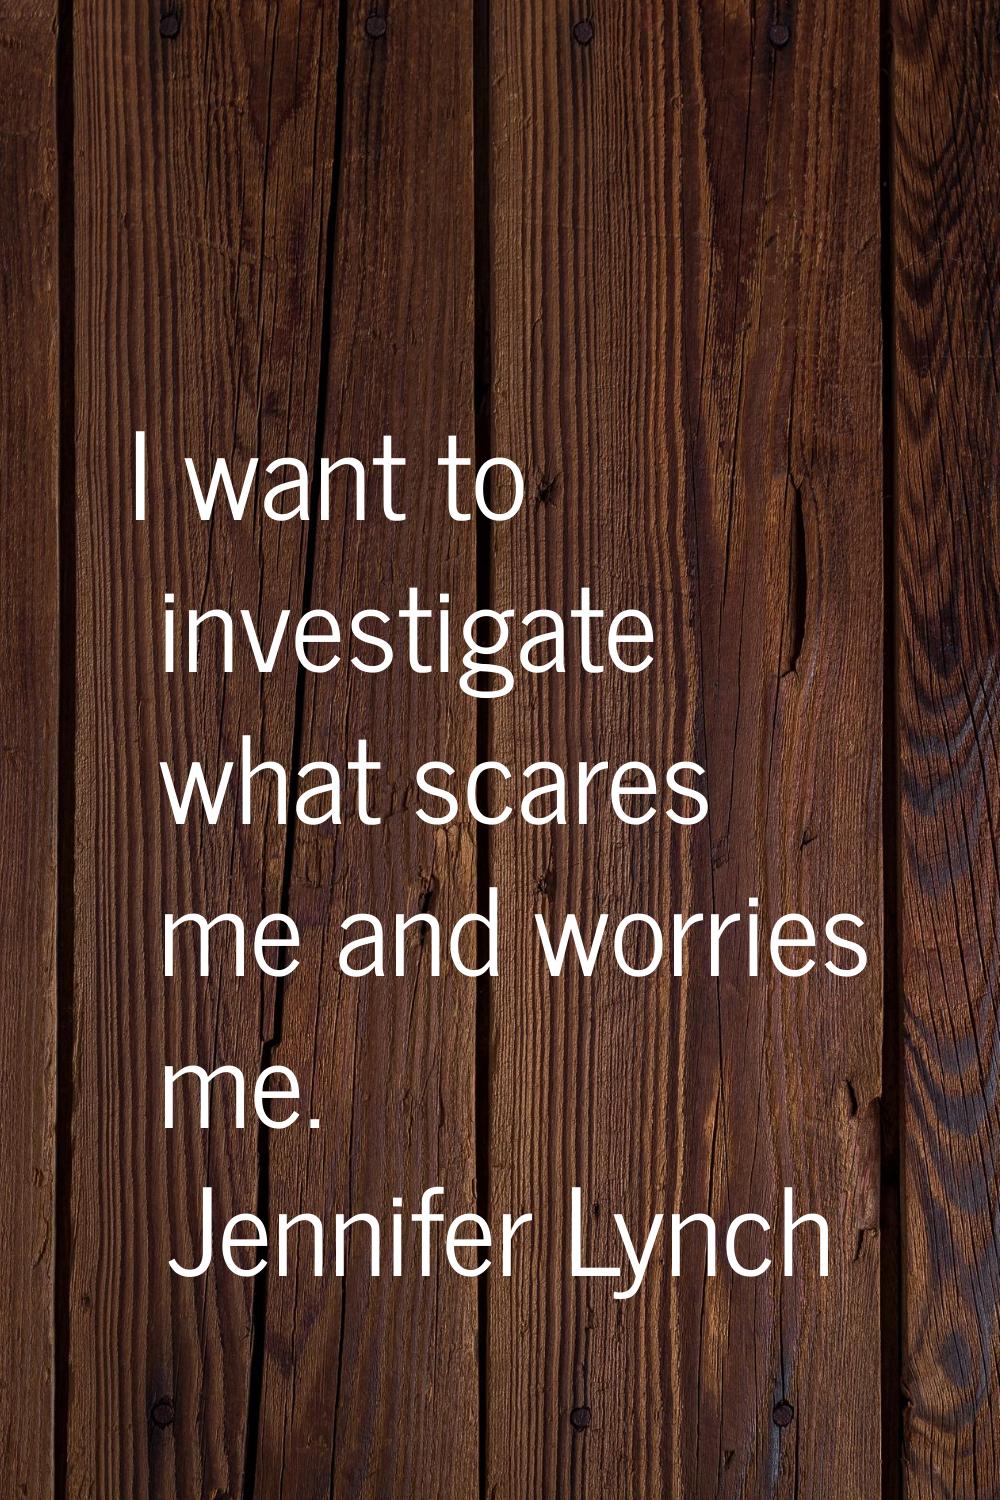 I want to investigate what scares me and worries me.